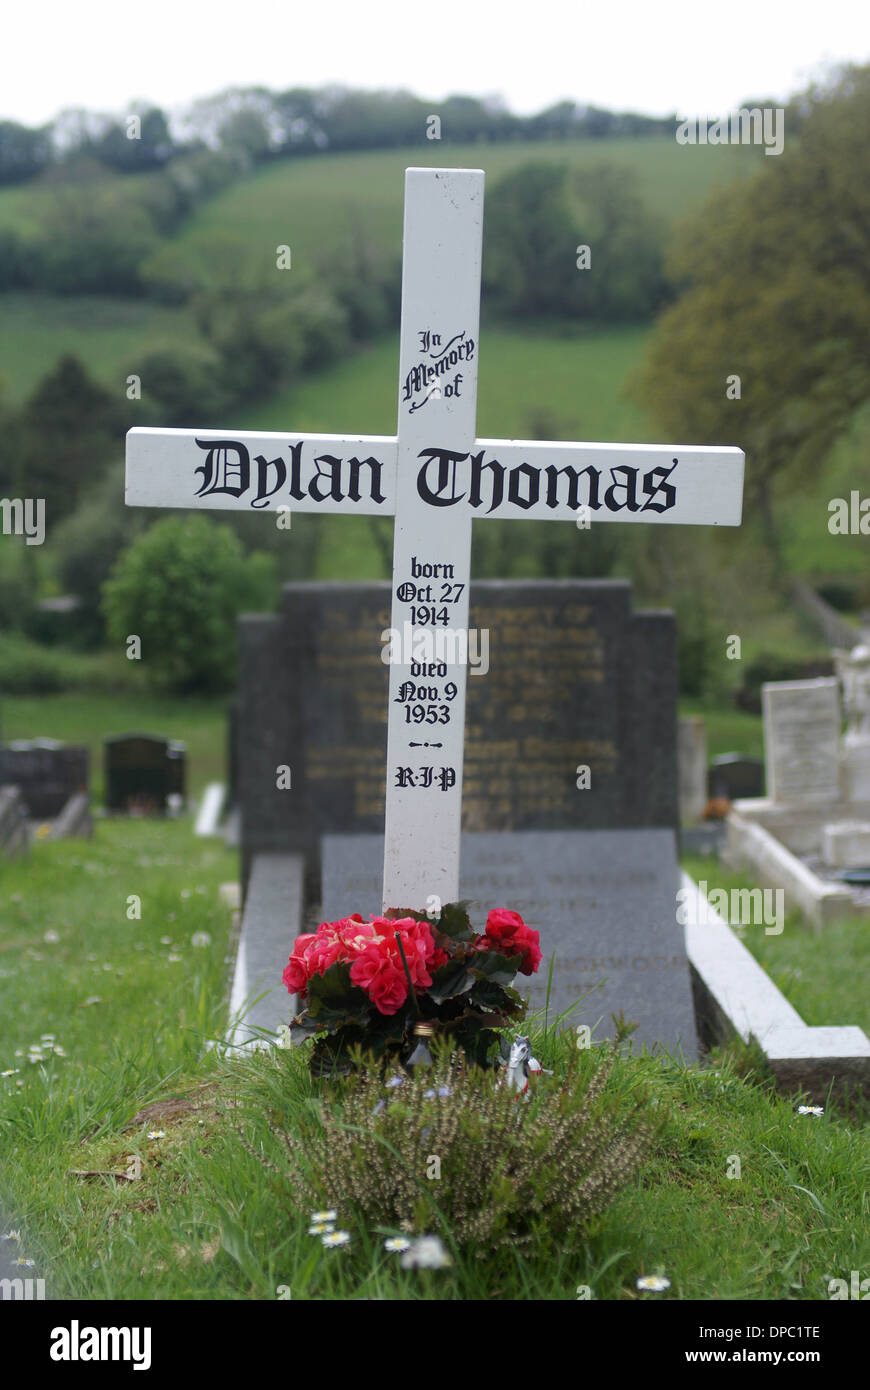 Dylan Thomas Grave   dylan thomas burial place Stock Photo